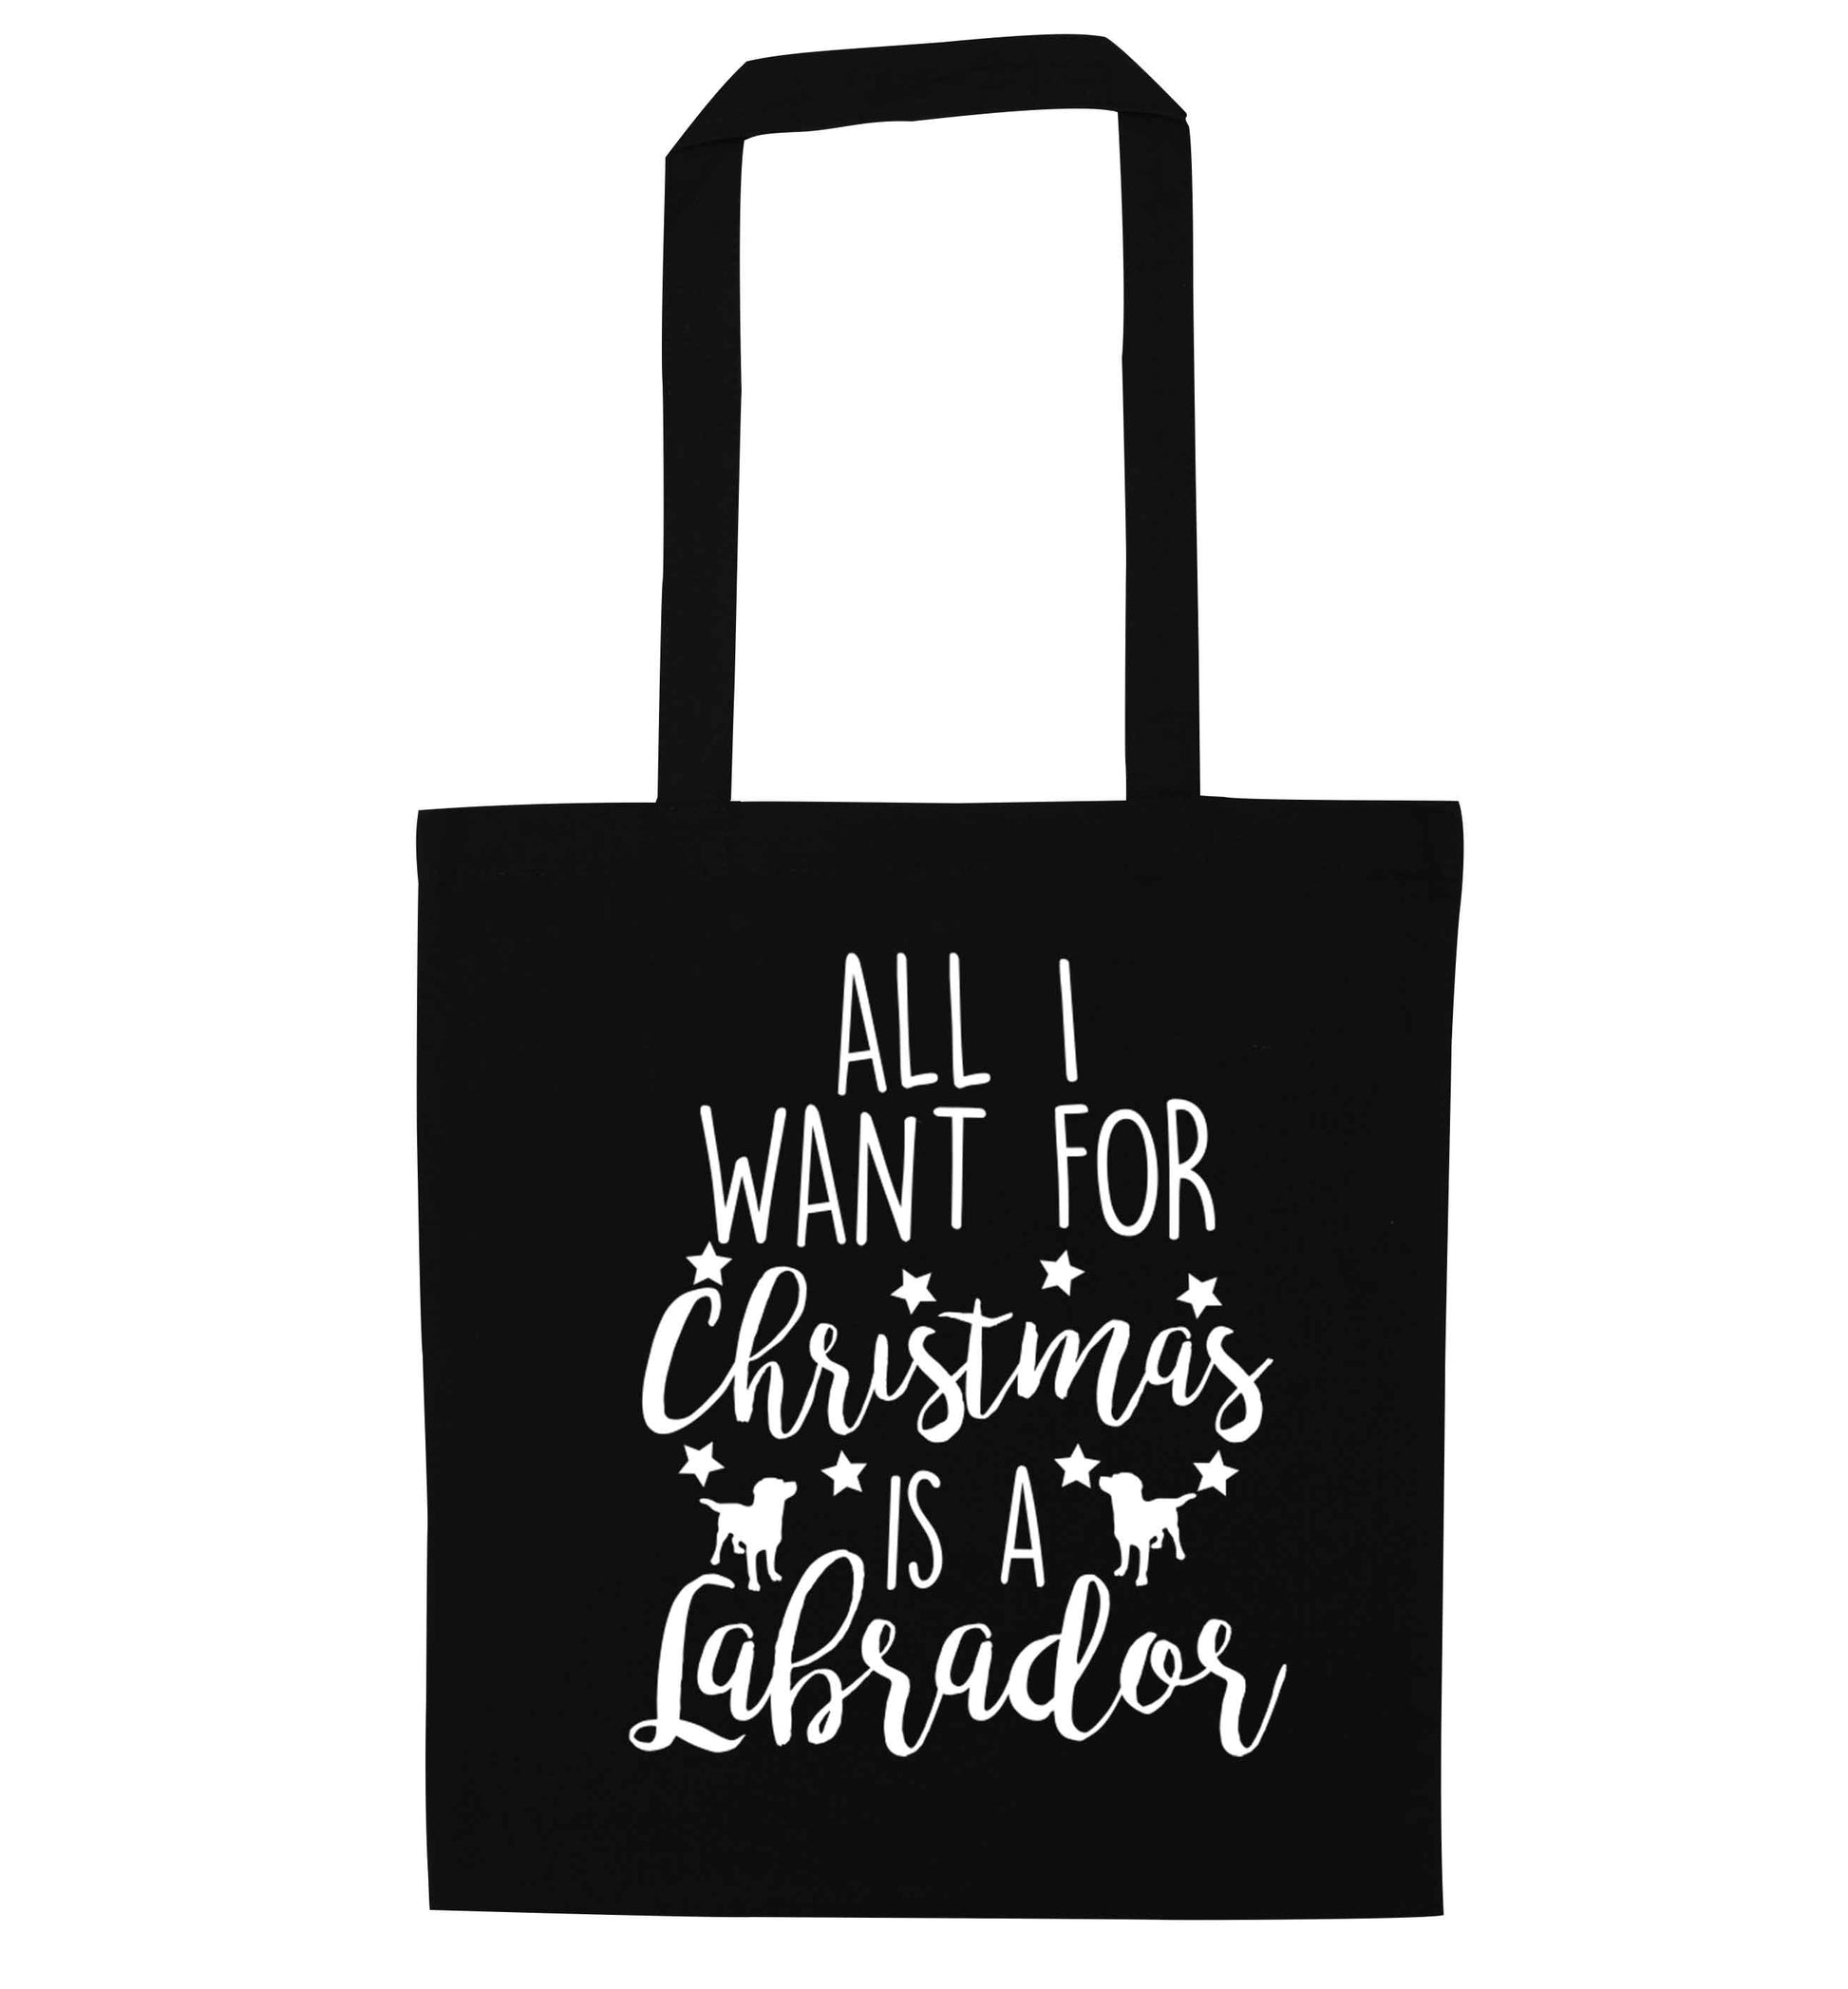 All I want for Christmas is a labrador black tote bag